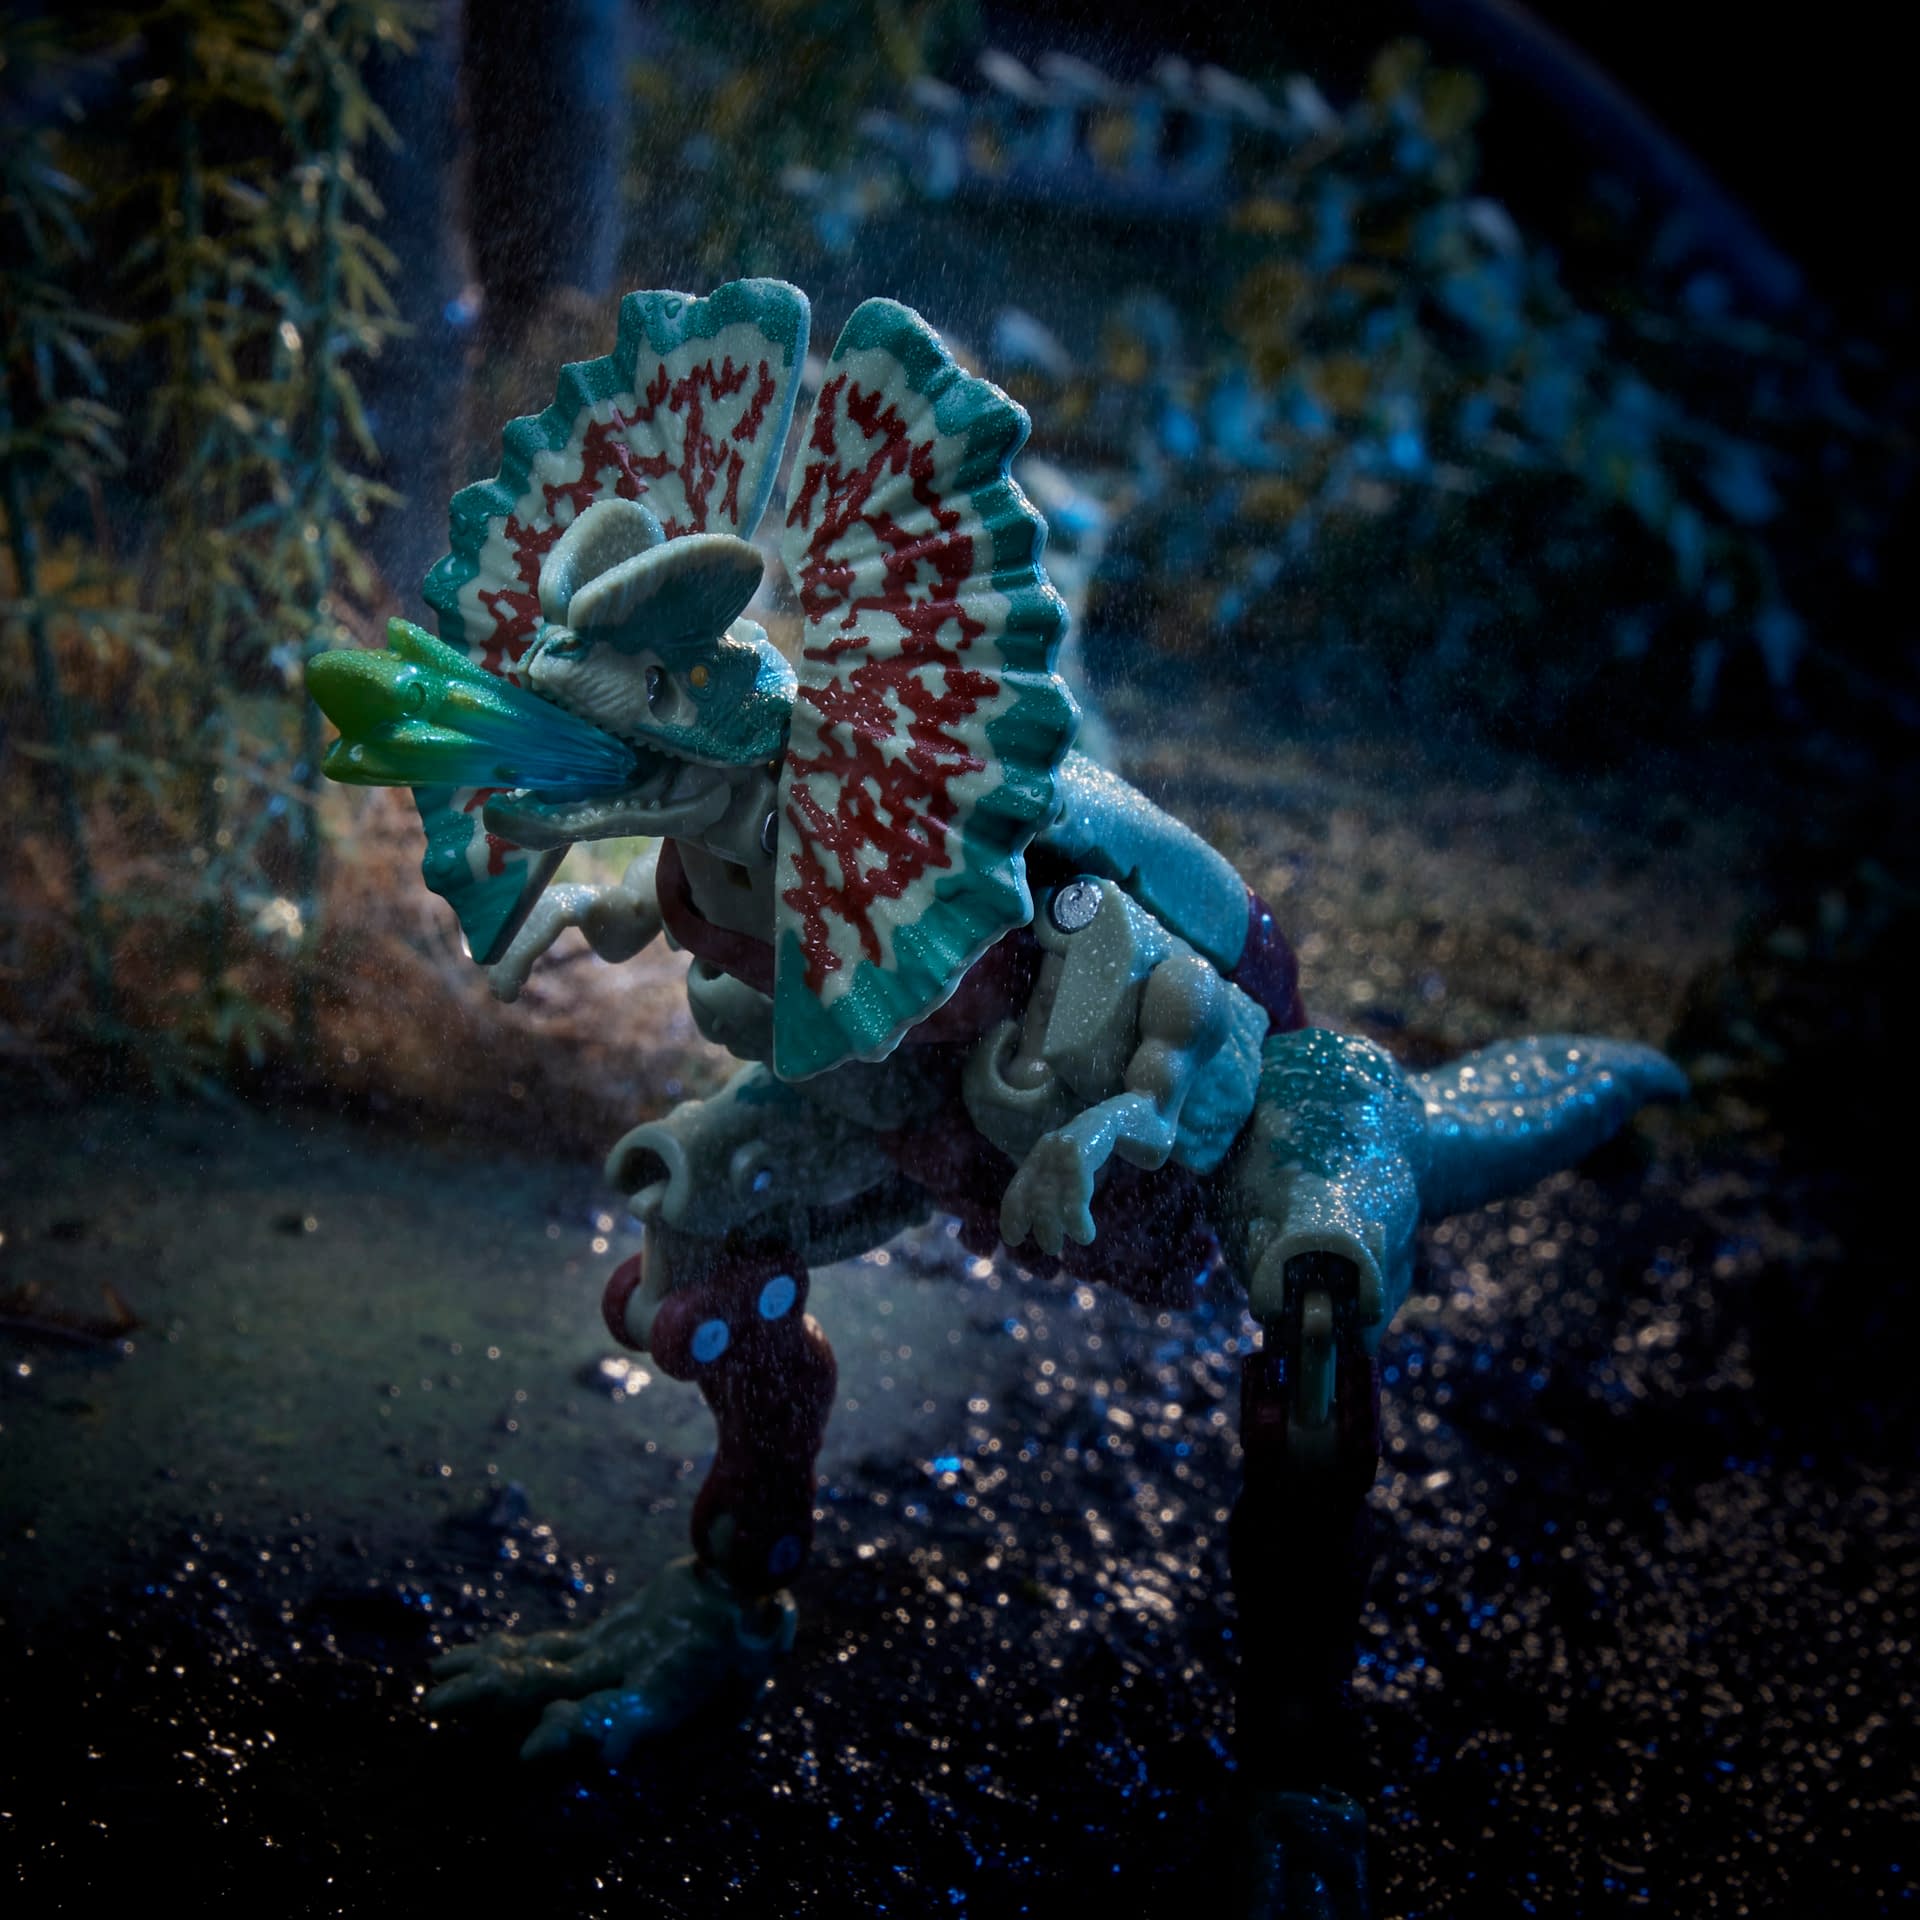 Hasbro Debuts New Jurassic Park x Transformers Dilophocon and JP12